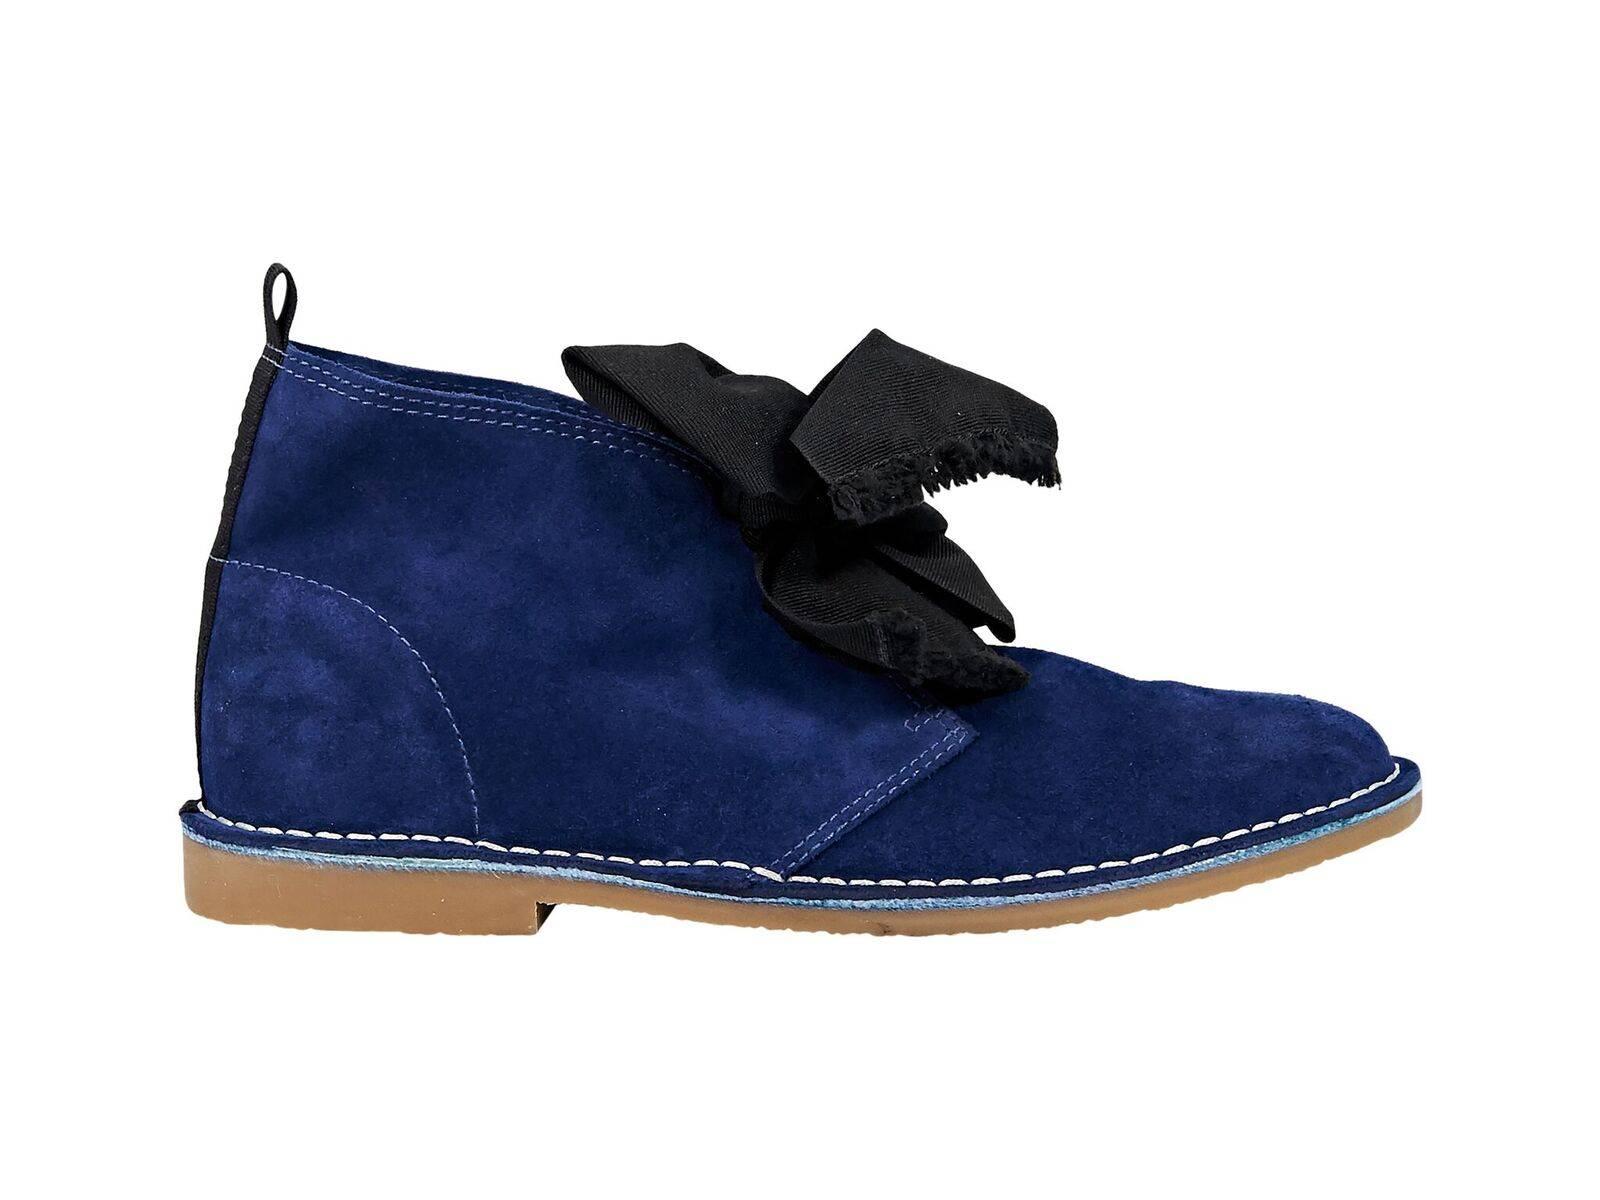 Product details:  Blue suede chukka boots by Frances Valentine.  Round toe.  Tie closure.  
Condition: Pre-owned. Like new- never worn.
Est. Retail $295